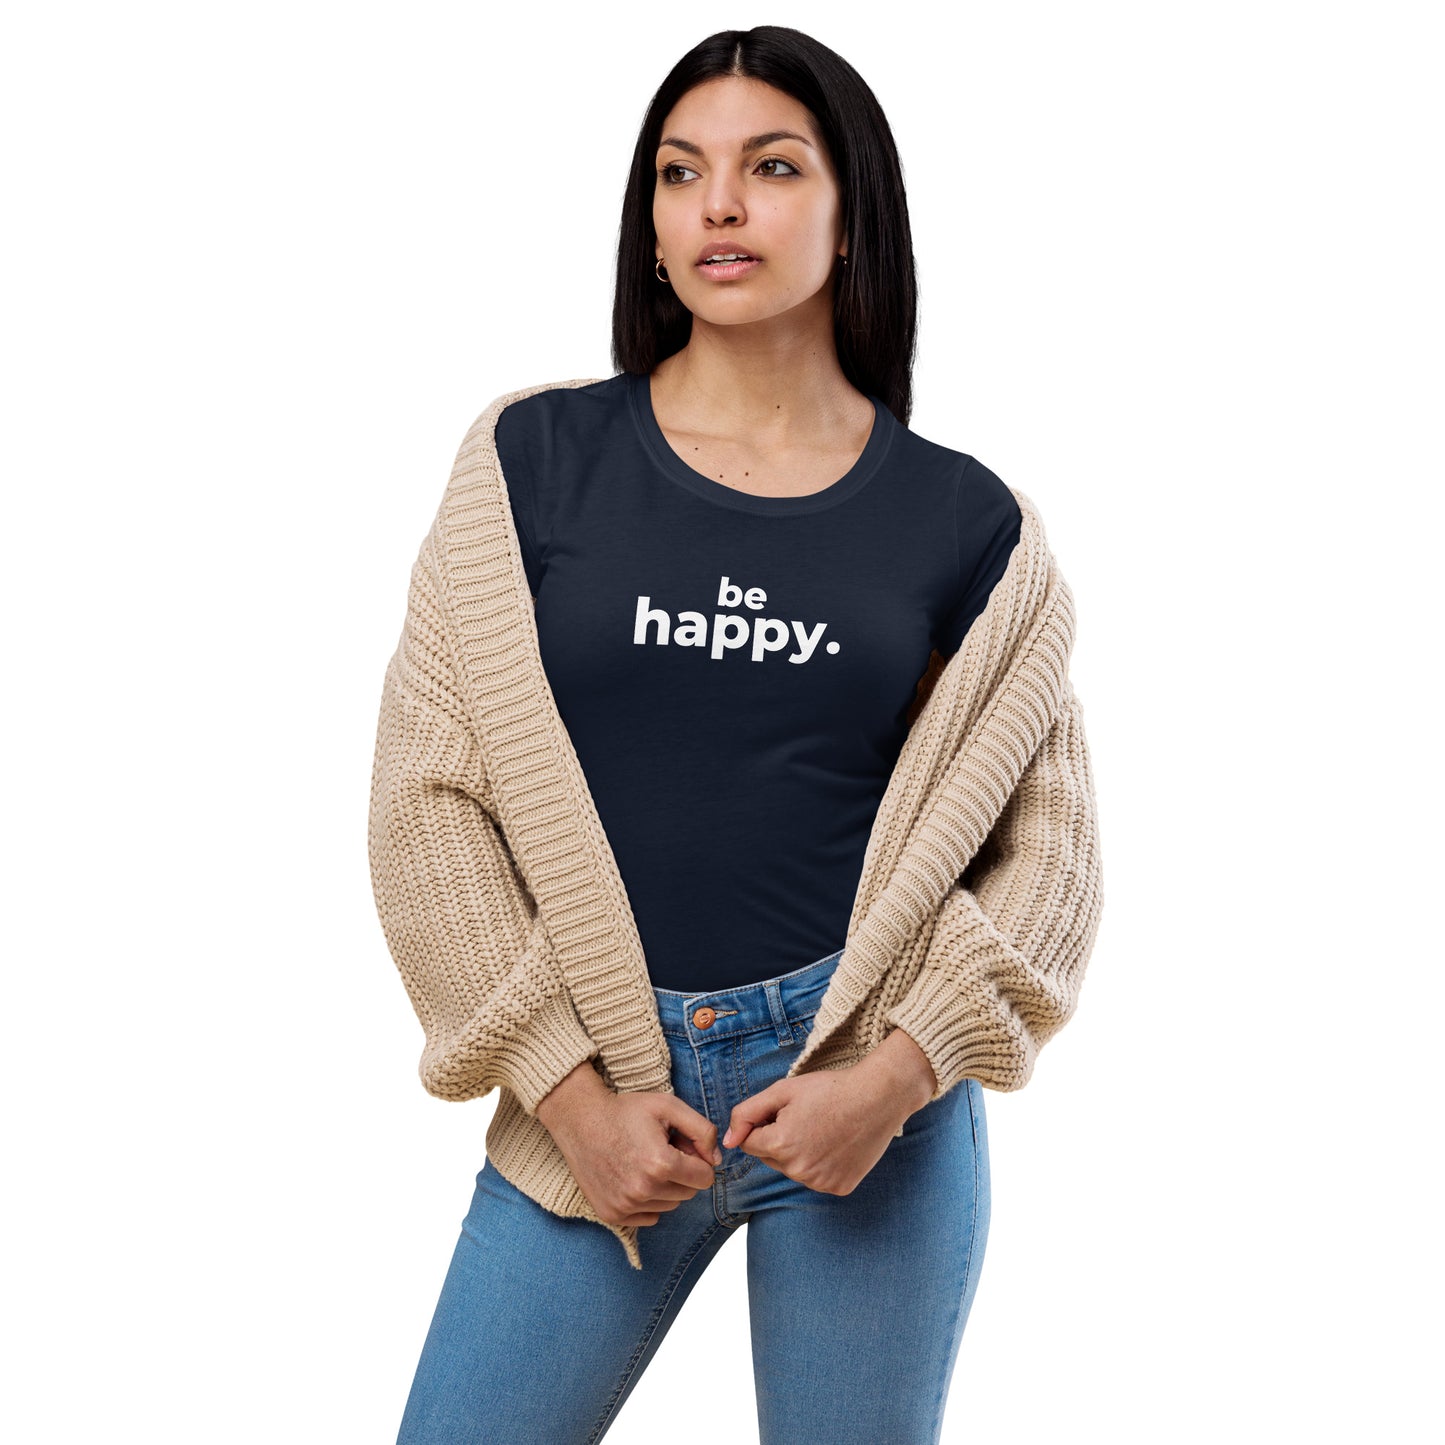 Be Happy - Women’s fitted t-shirt